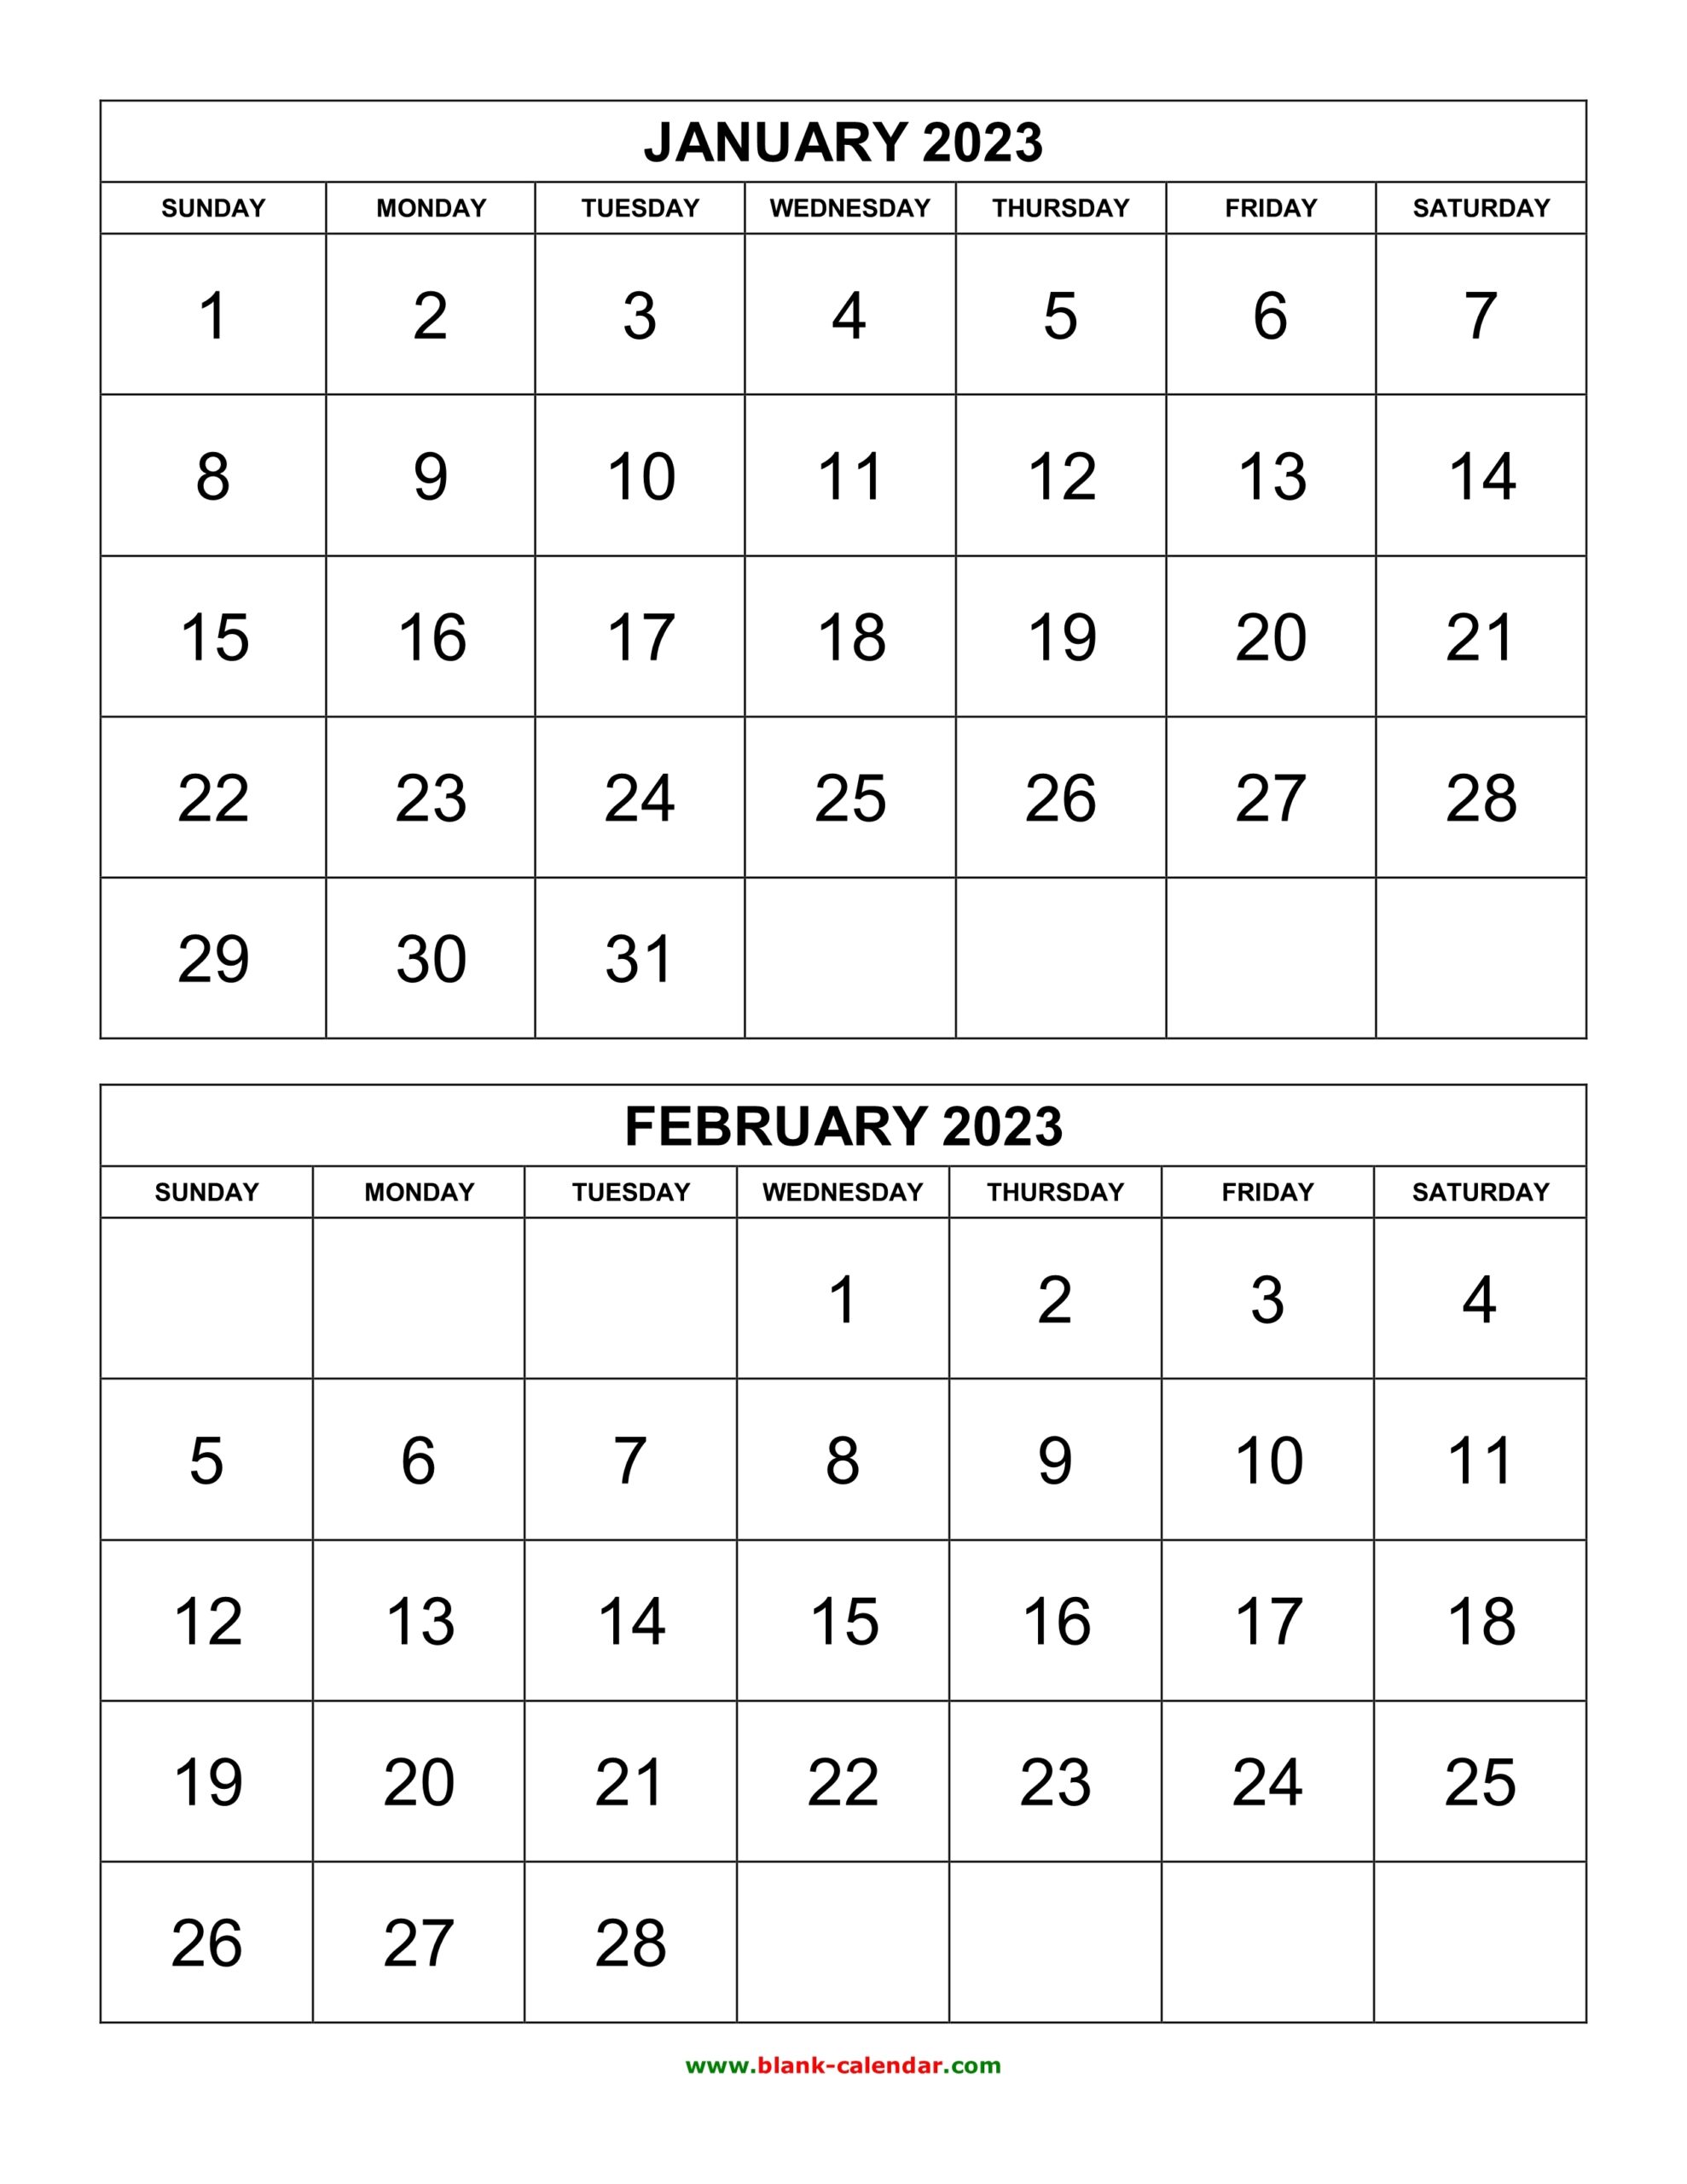 Free Download Printable Calendar 2023 2 Months Per Page 6 Pages vertical 